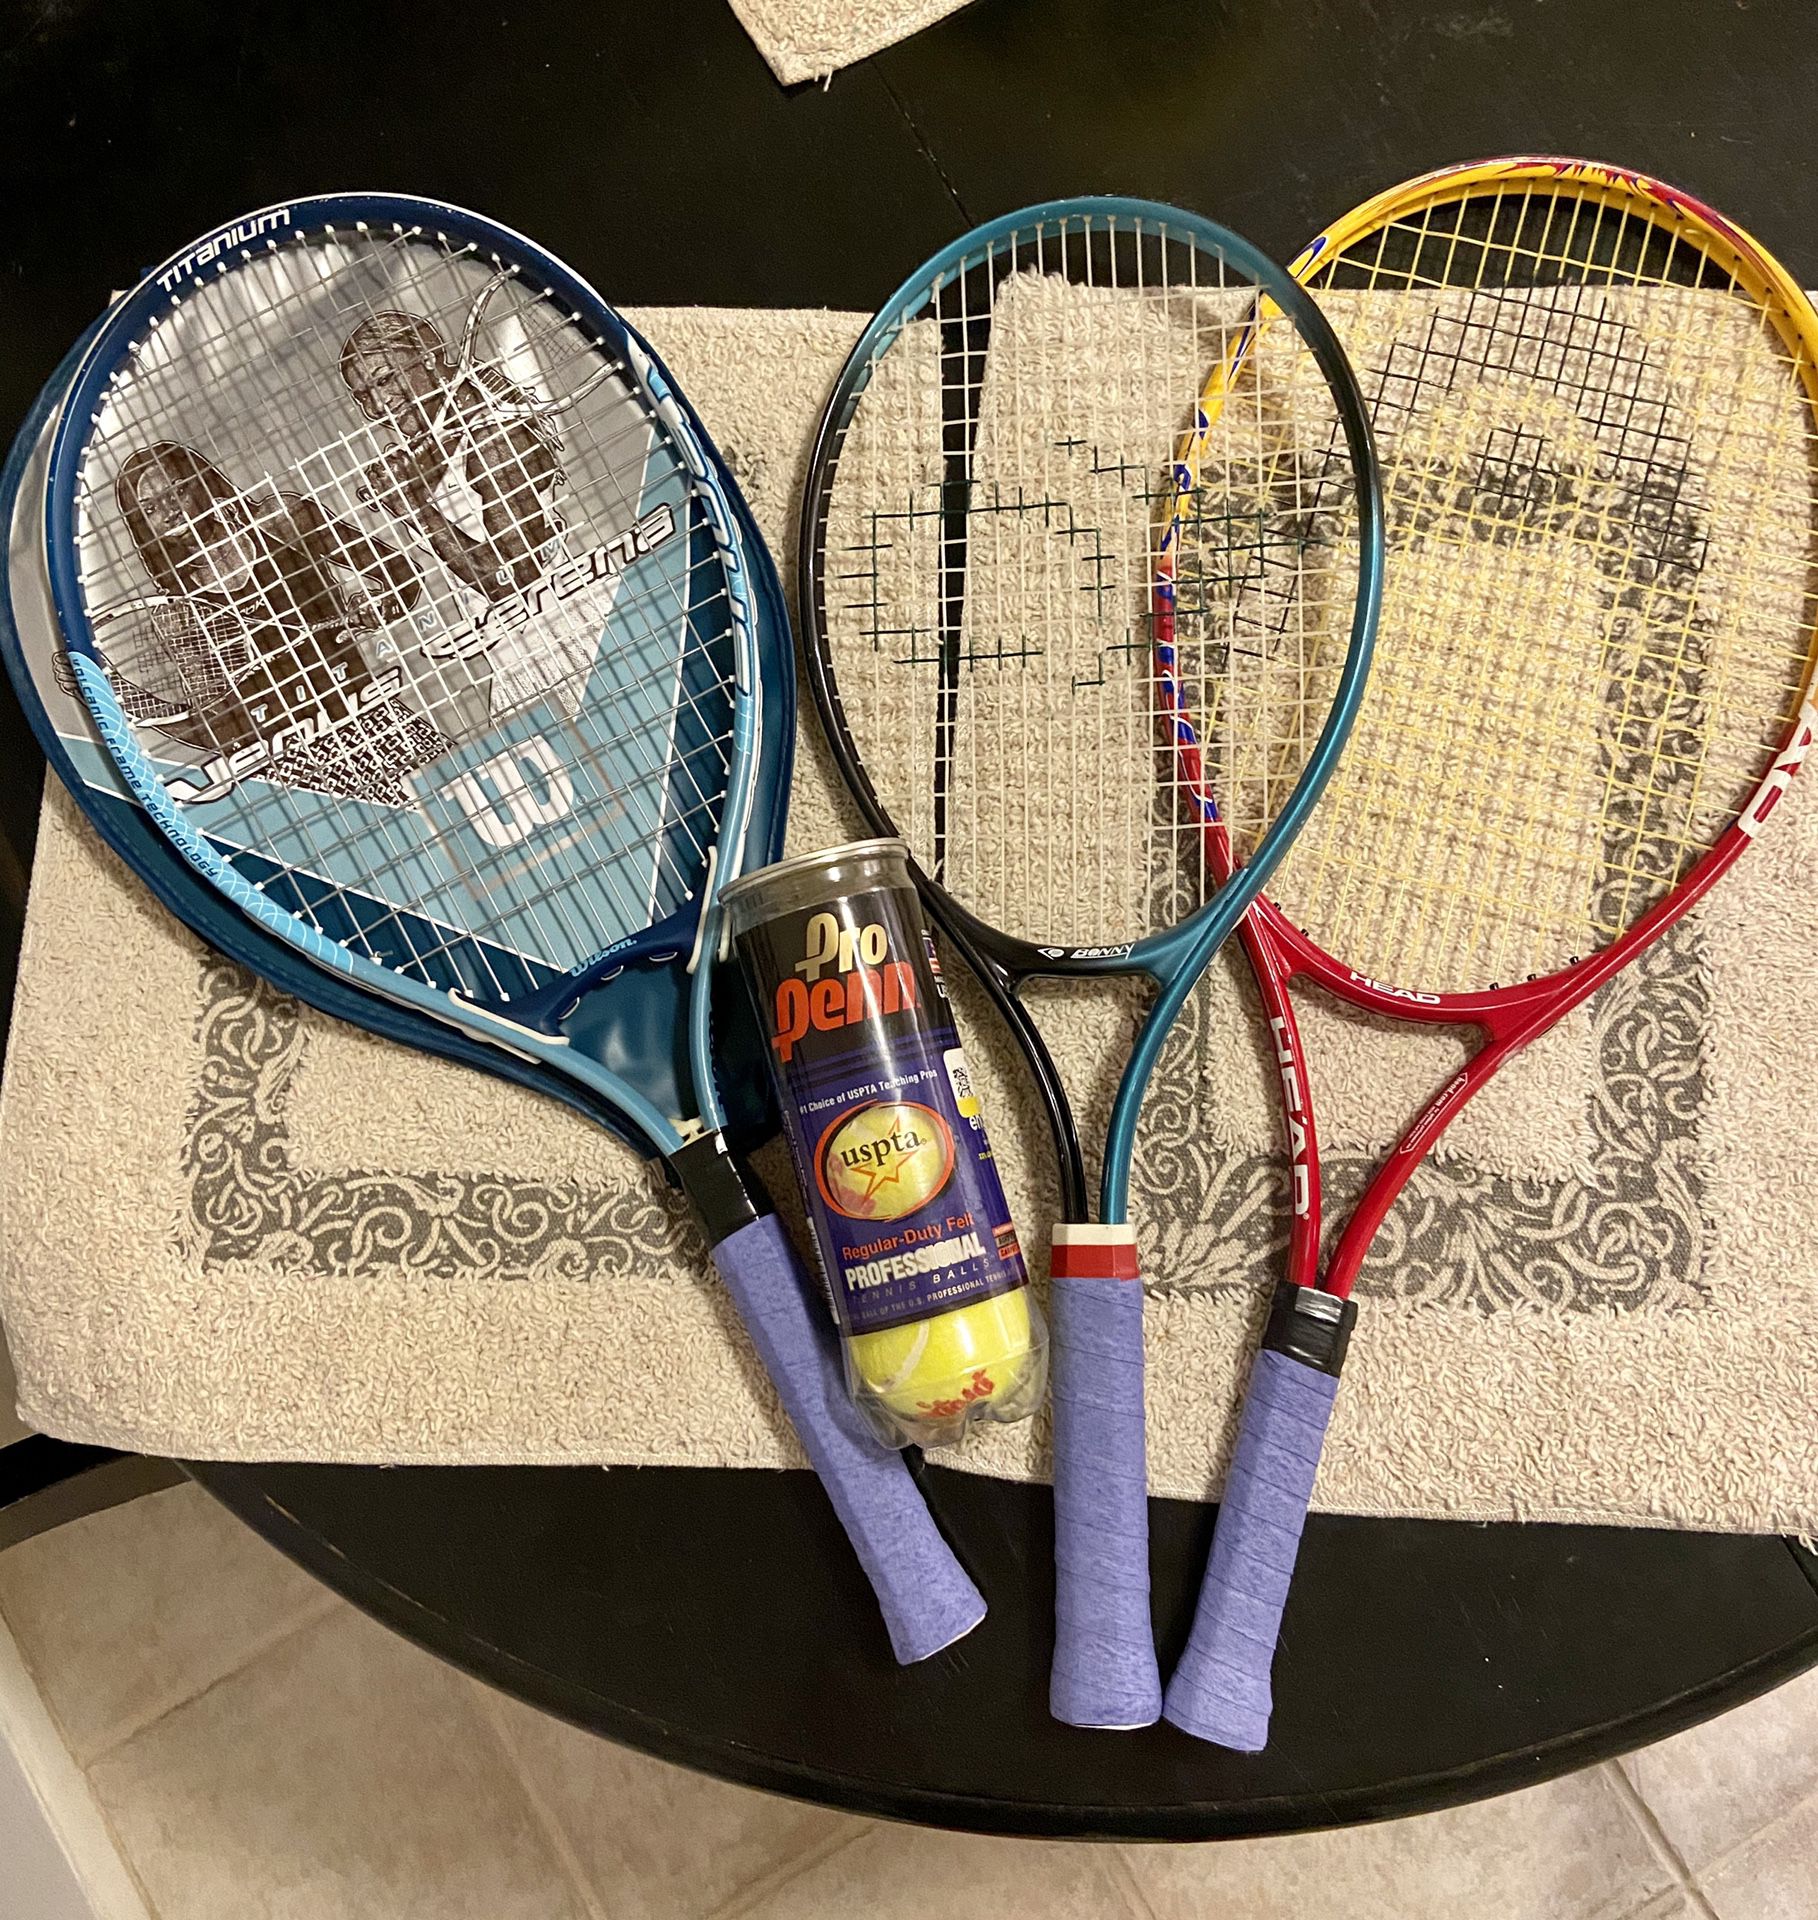 3 Tennis Rackets (w/ new grips & unopened can of Tennis balls)